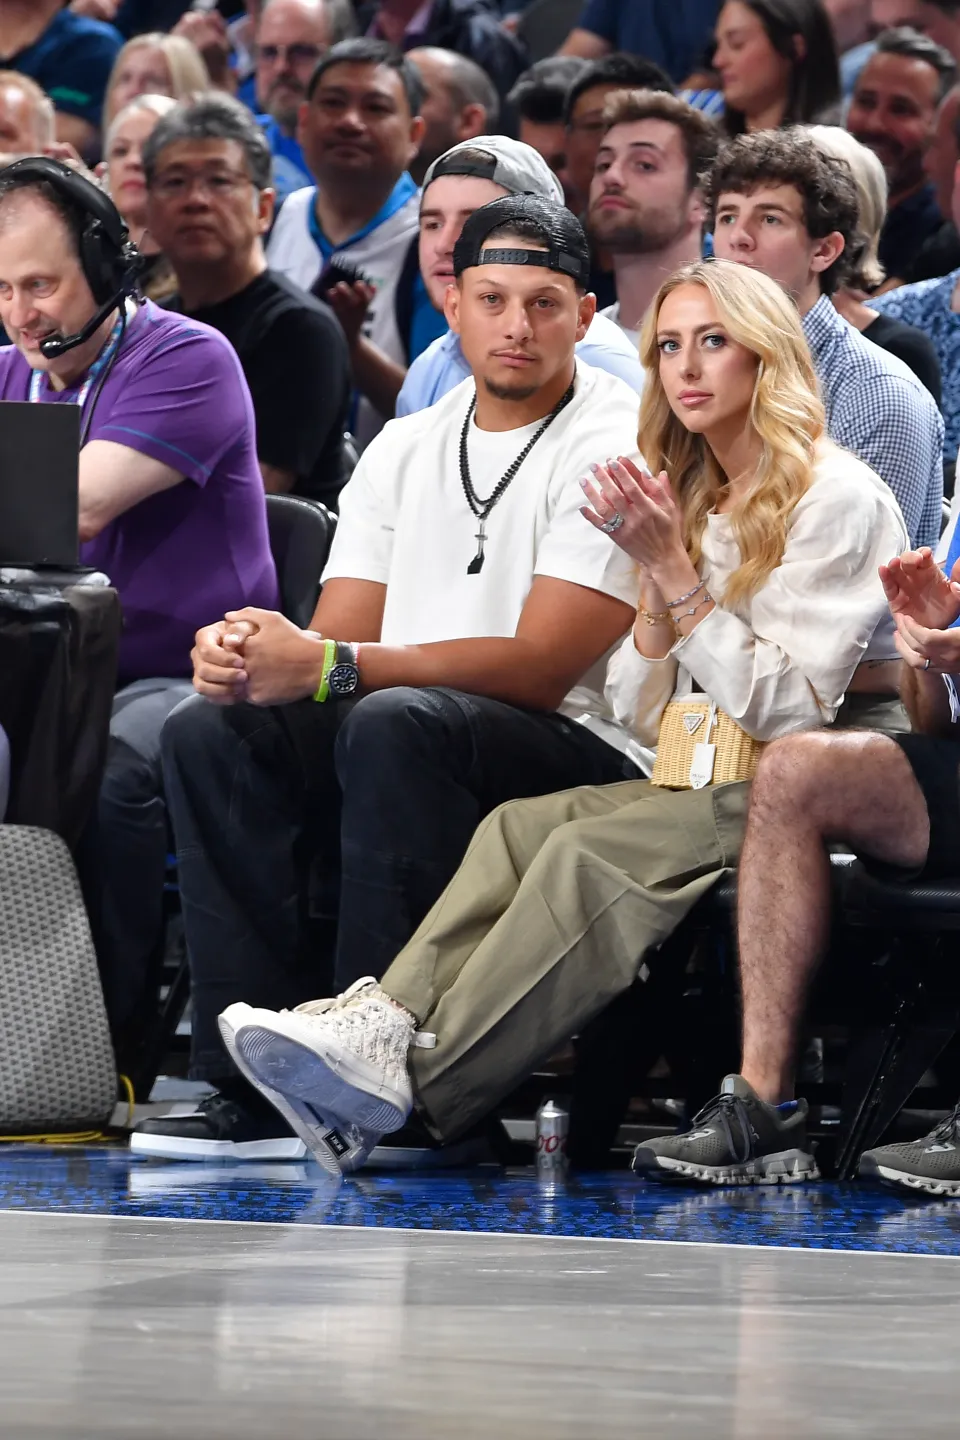 BLURRED LINES: Brittany Mahomes shares pic with Patrick at NBA game but fans only have eyes for Travis Kelce detail in background: The Chiefs tight end was given an unexpected reception from the Mavericks crowd